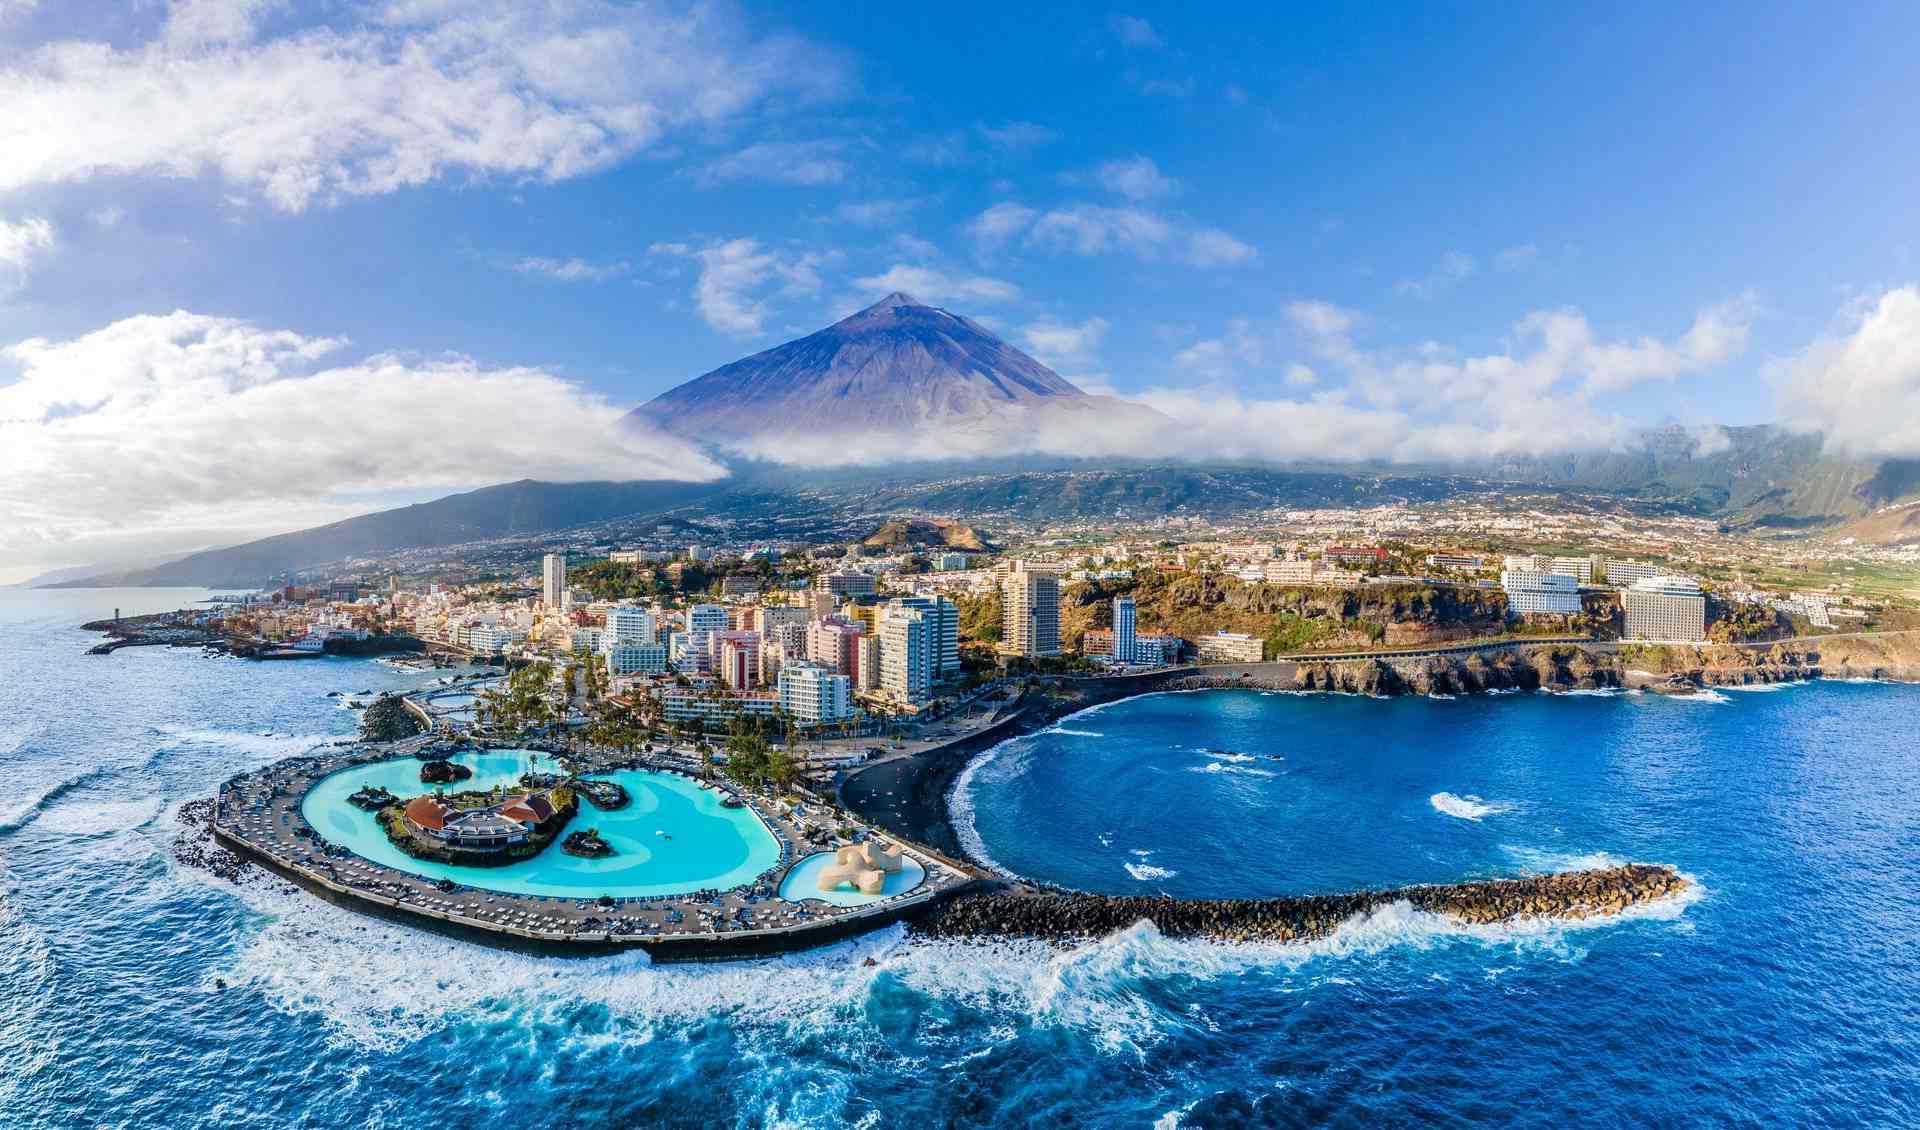 Tenerife November Climate Guide: What to Expect